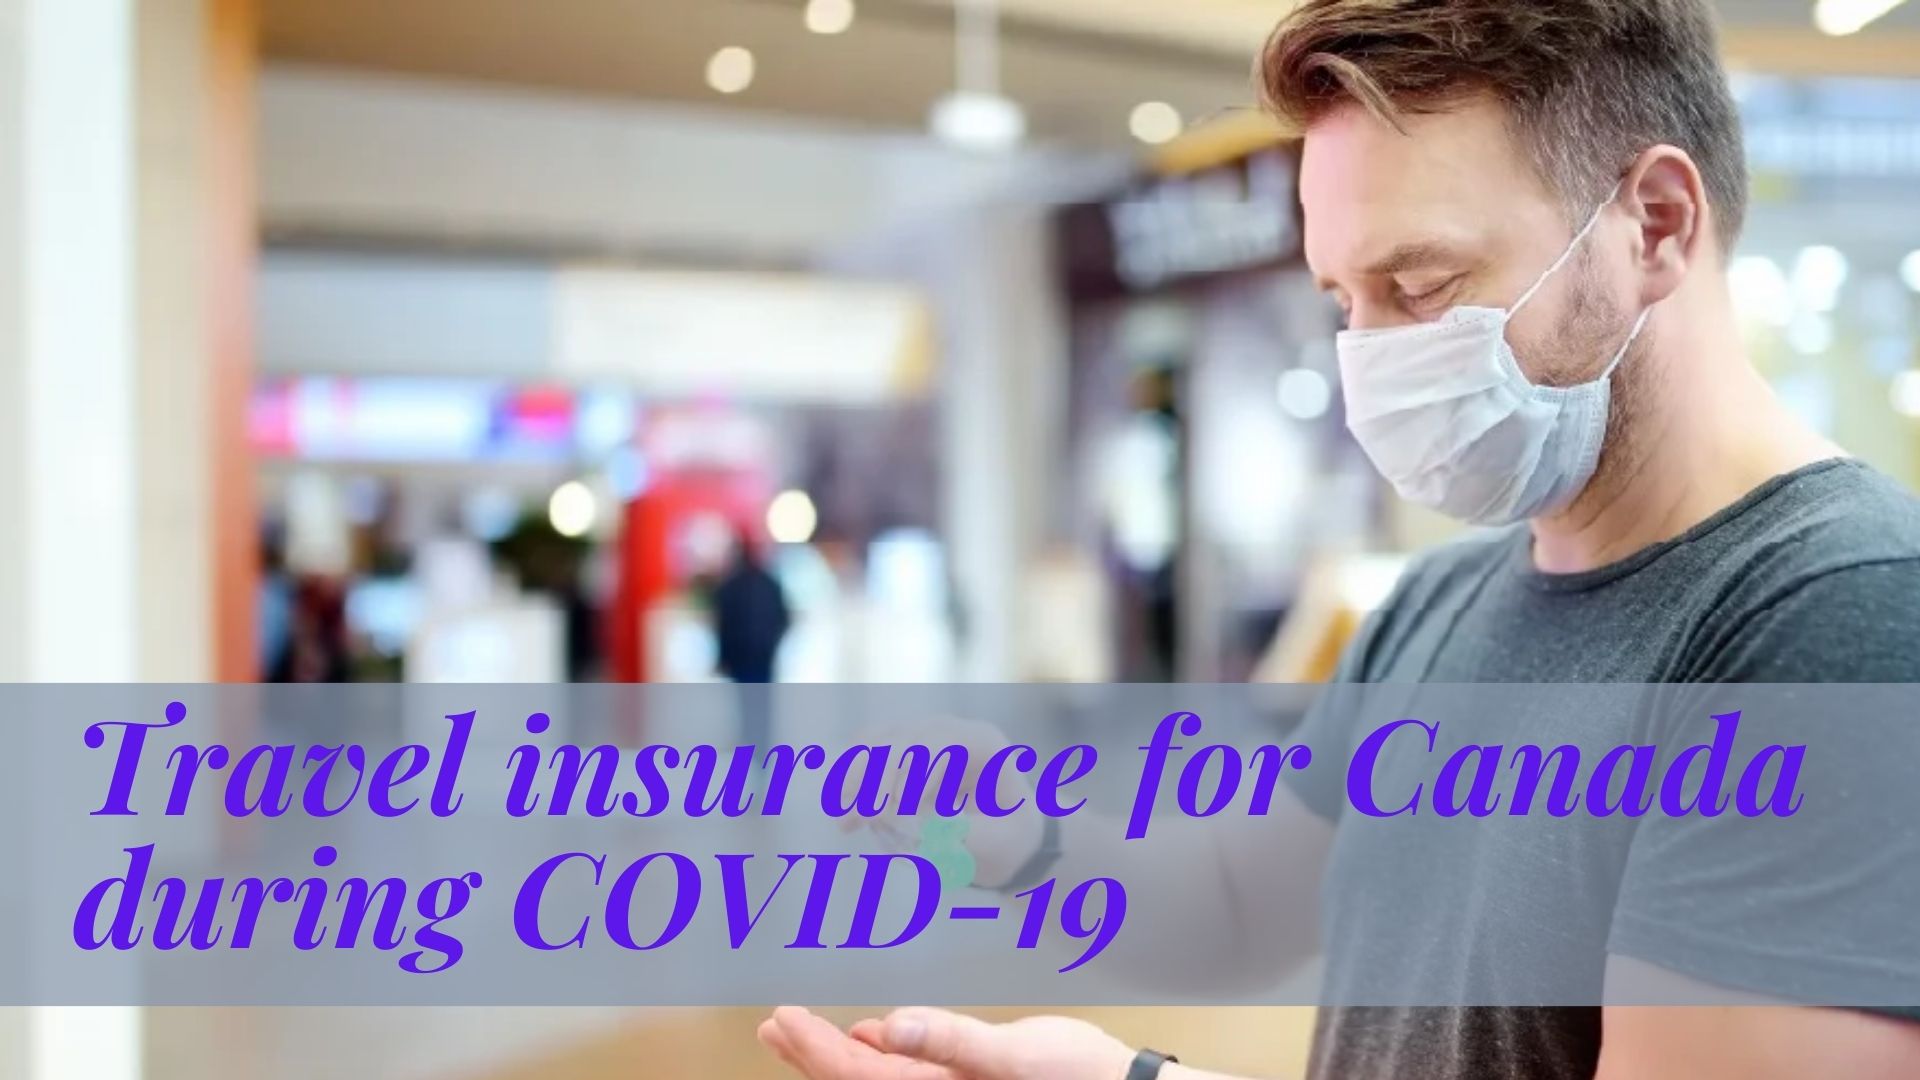 Travel insurance for Canada during COVID-19